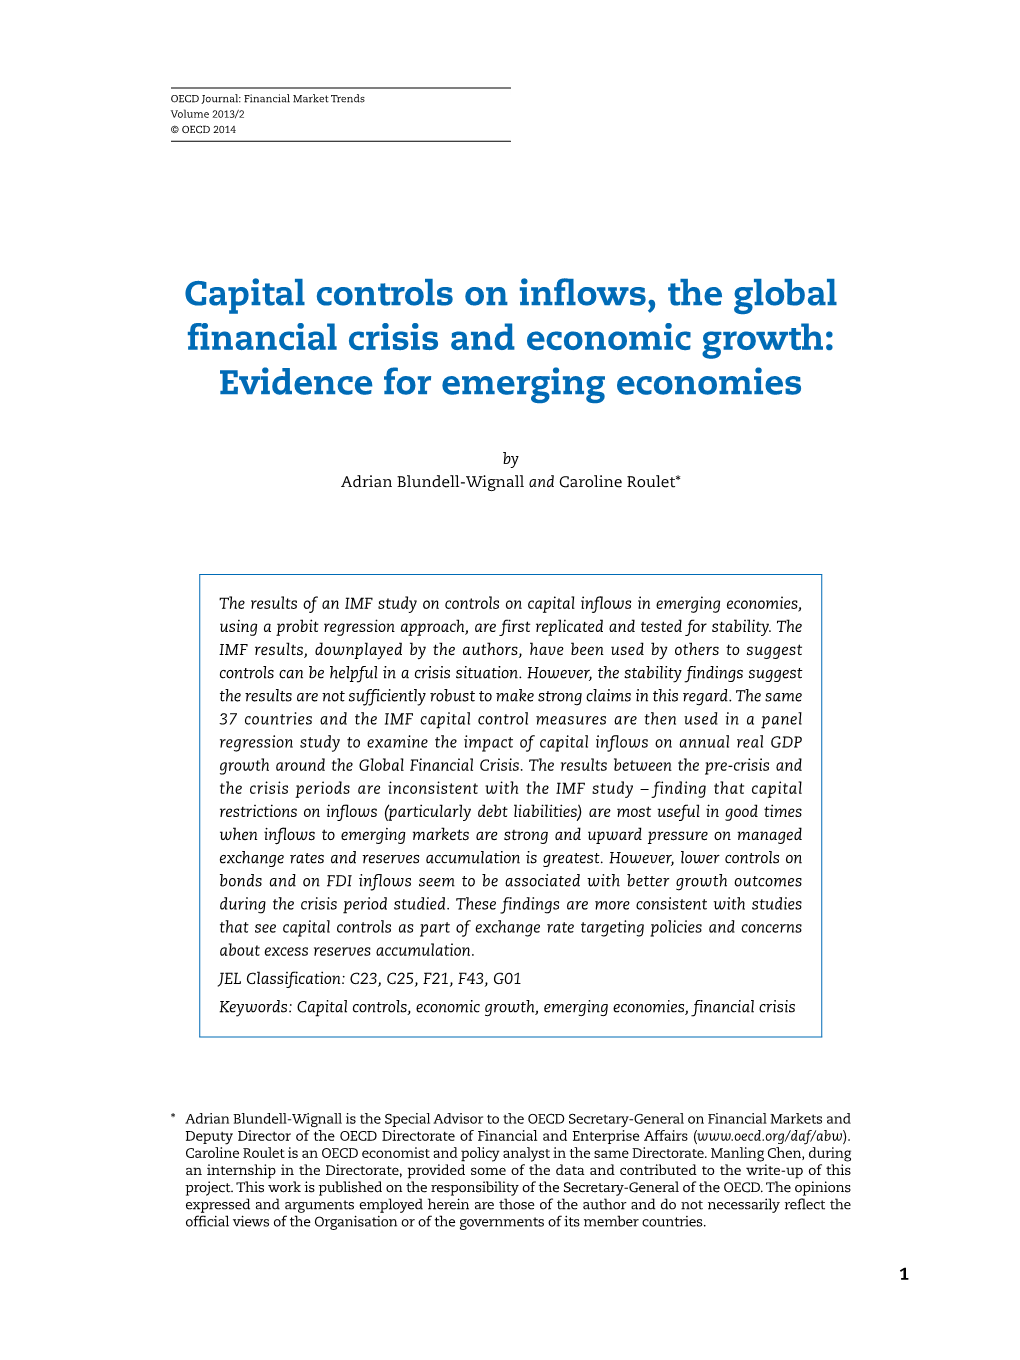 Capital Controls on Inflows, the Global Financial Crisis and Economic Growth: Evidence for Emerging Economies